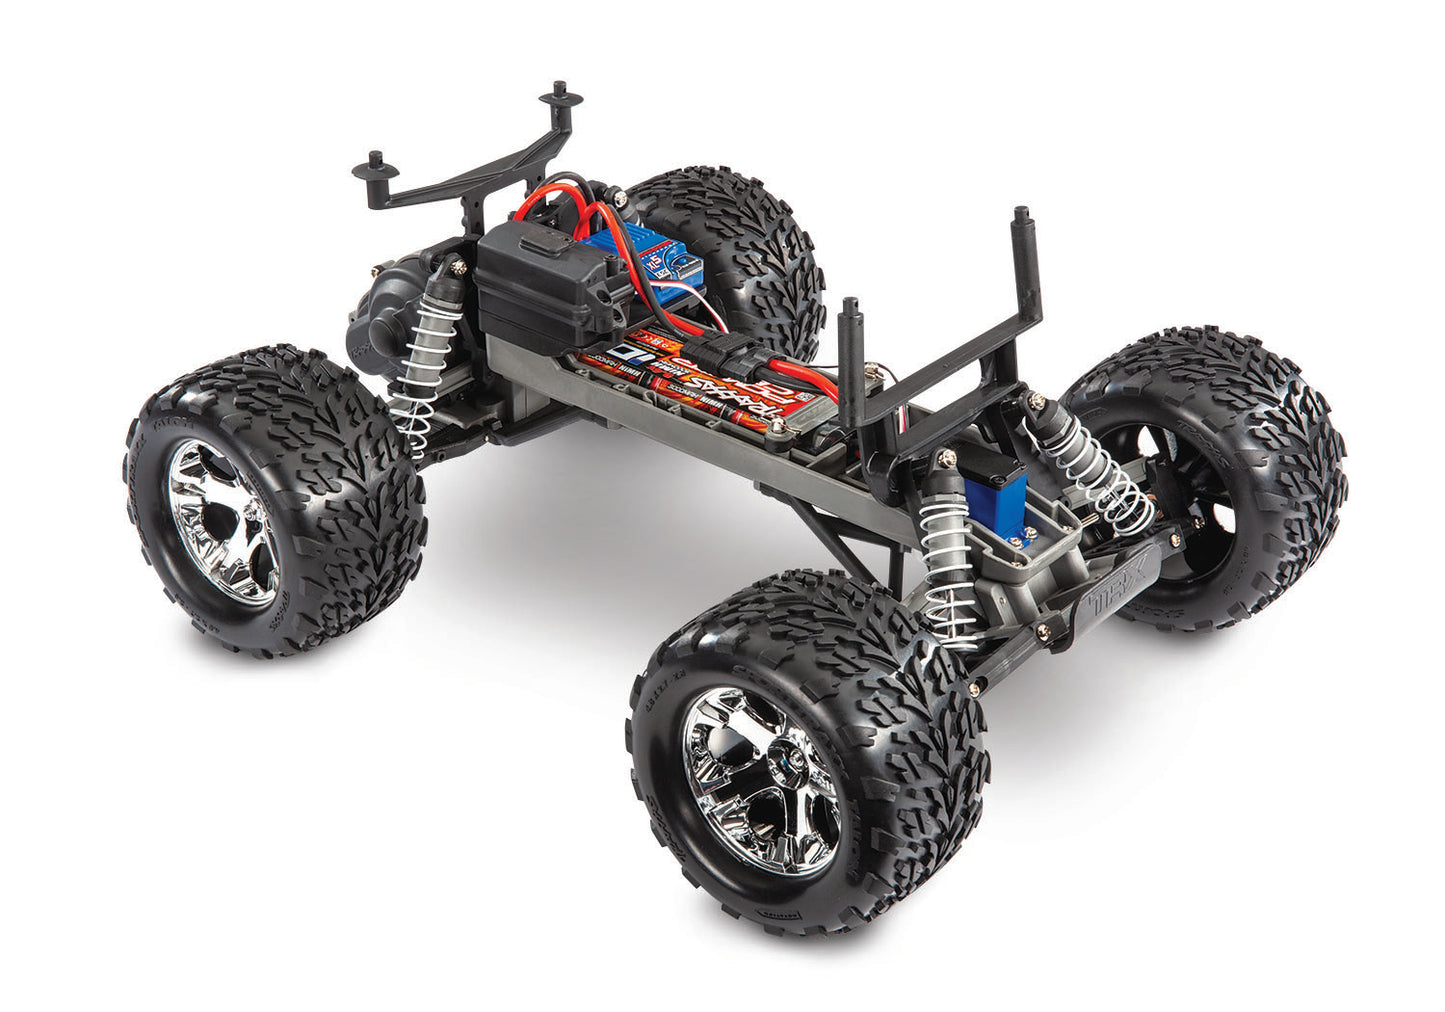 Traxxas 36054-8 Blue  Stampede1/10 Scale Monster Truck with TQ™ 2.4GHz radio system